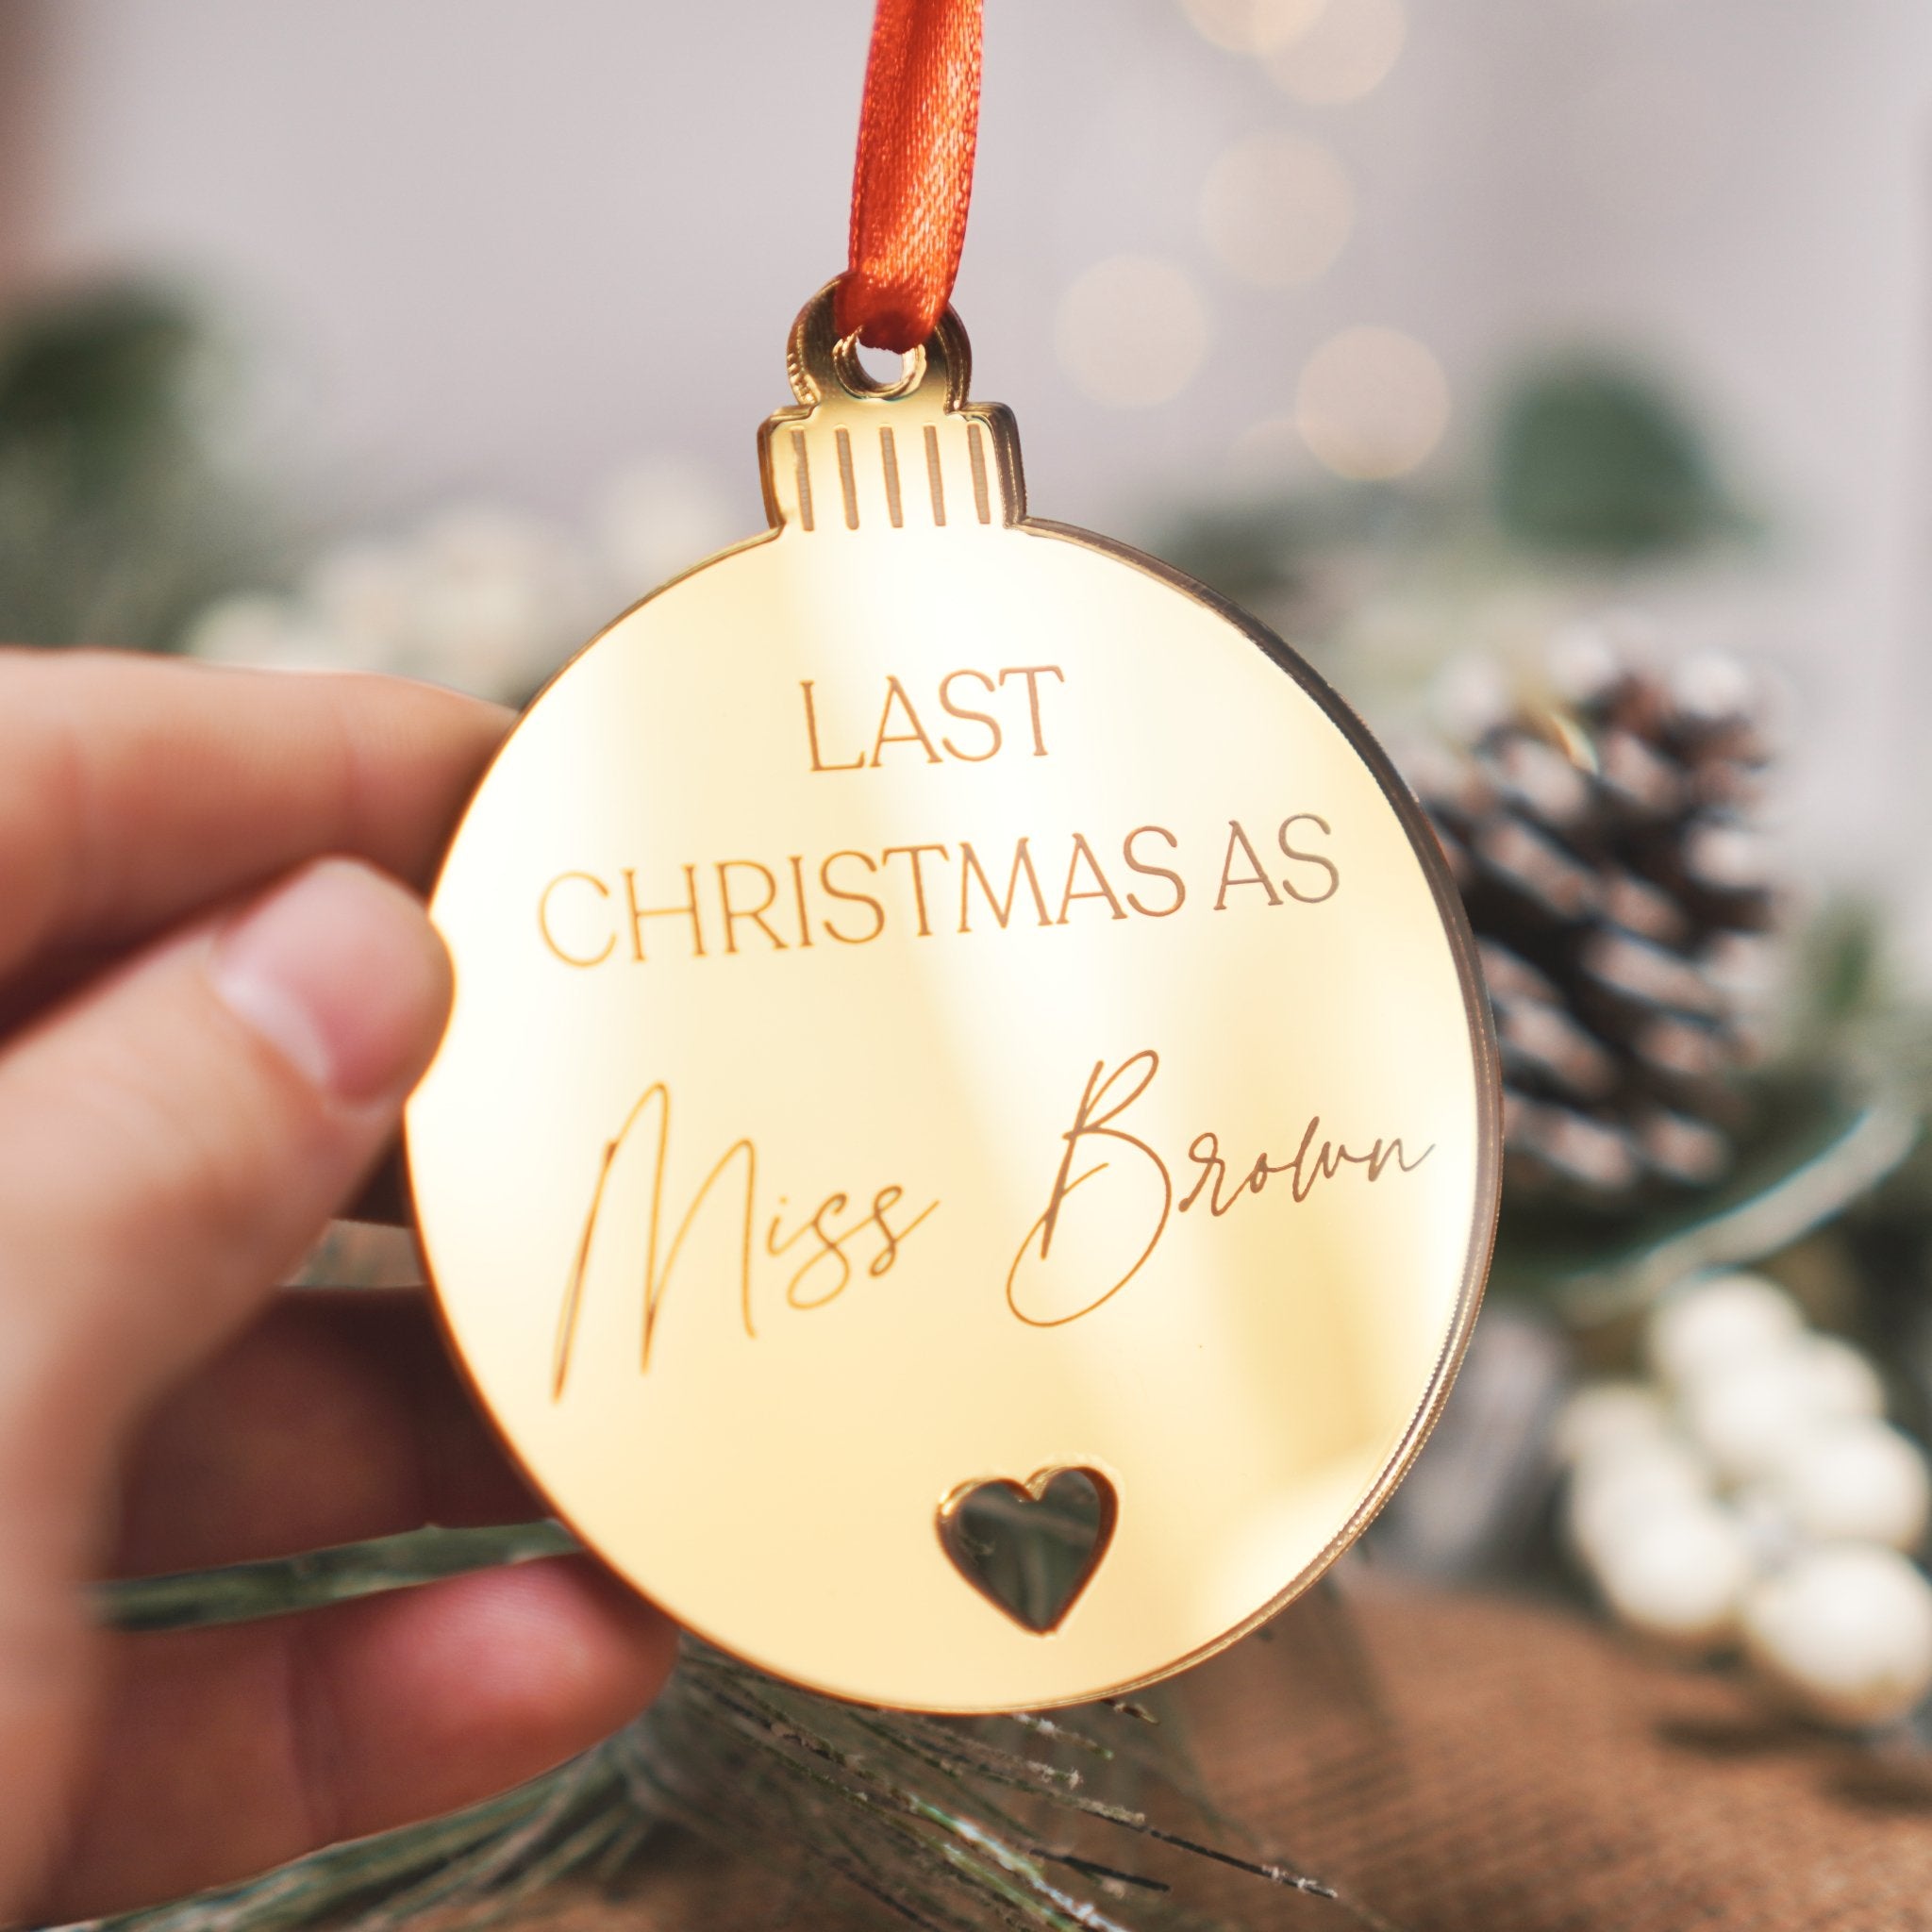 personalised Christmas ornament decoration with heart cut out for friend